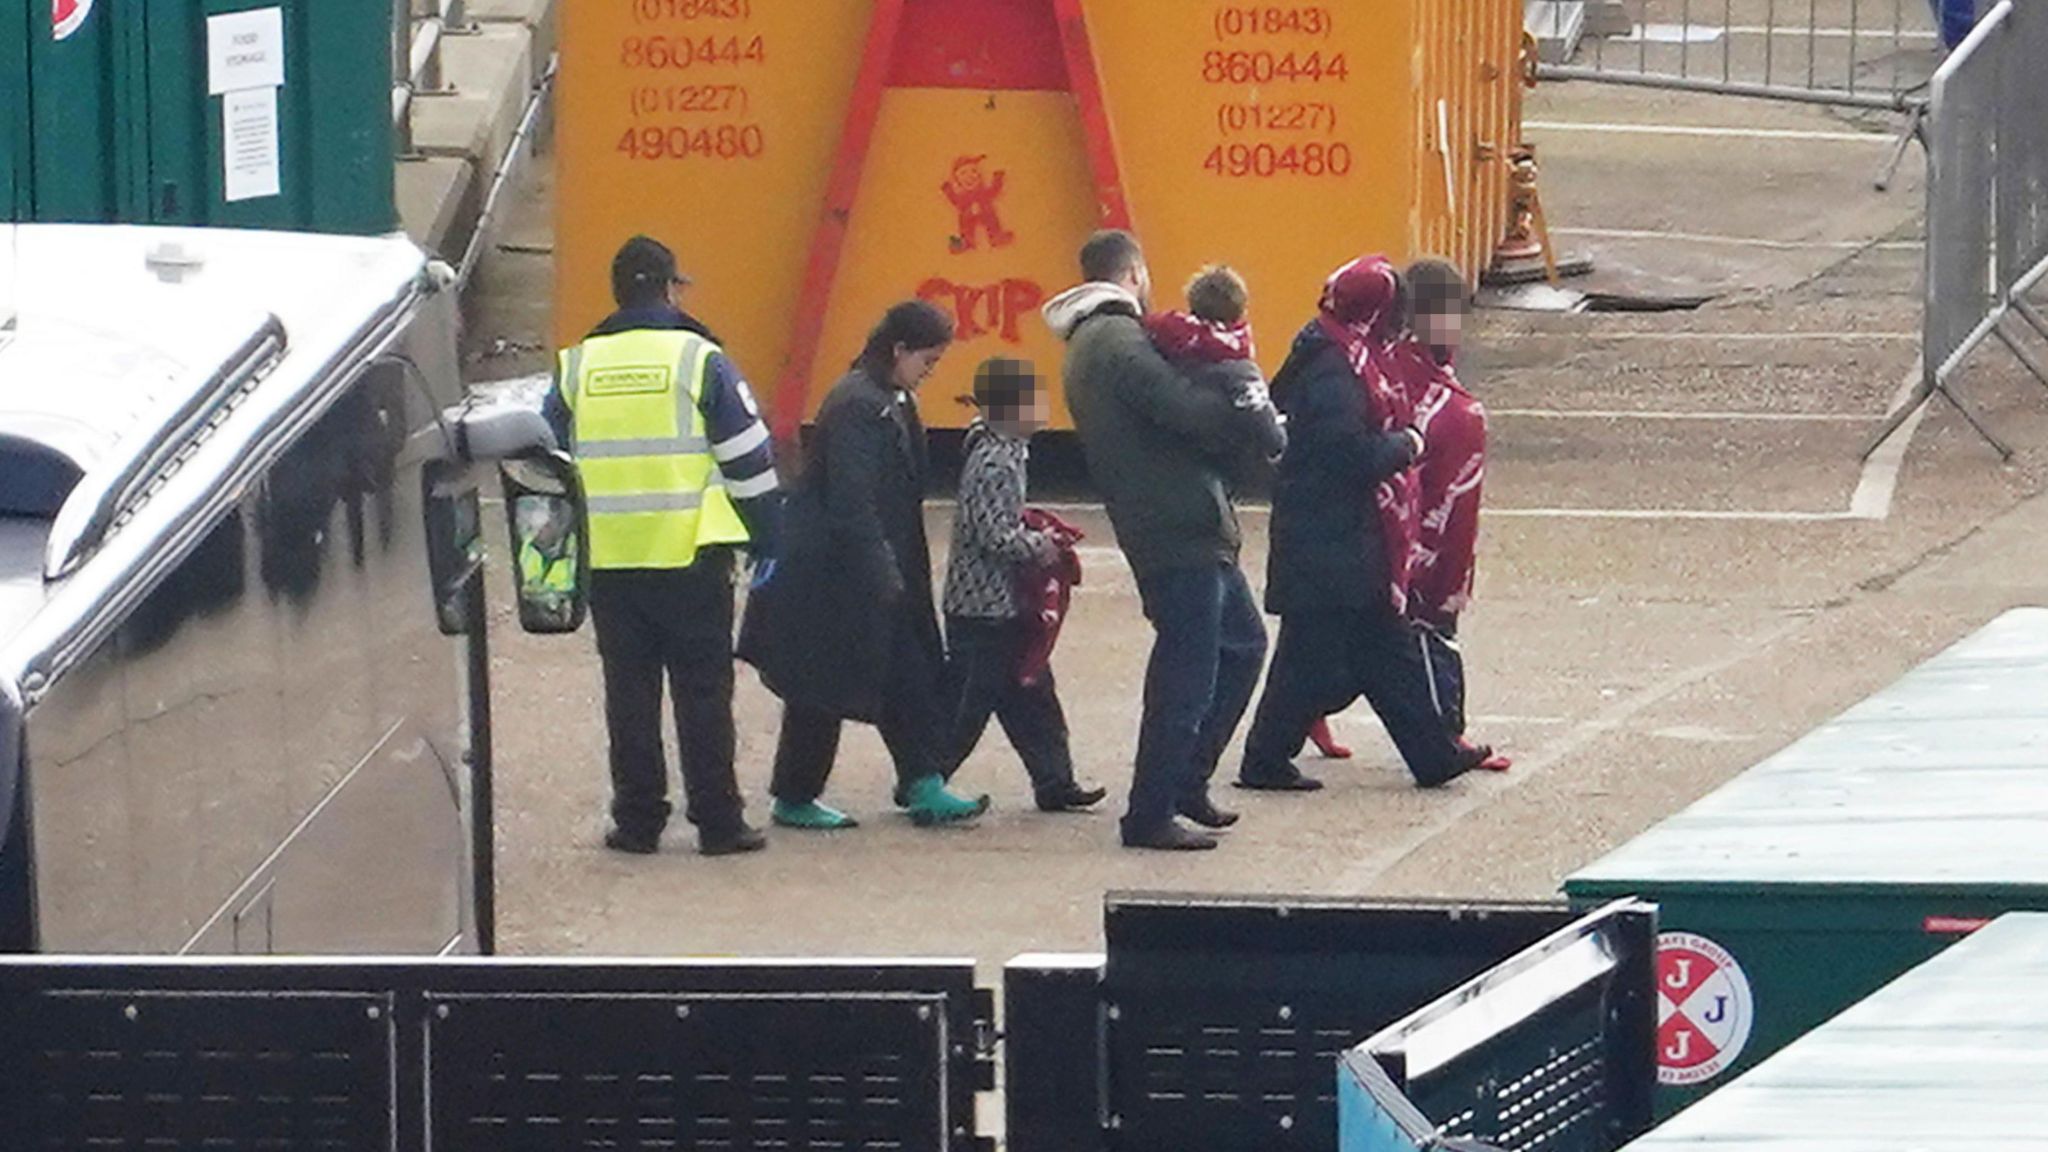 Migrant family arriving at Dover on 4 March